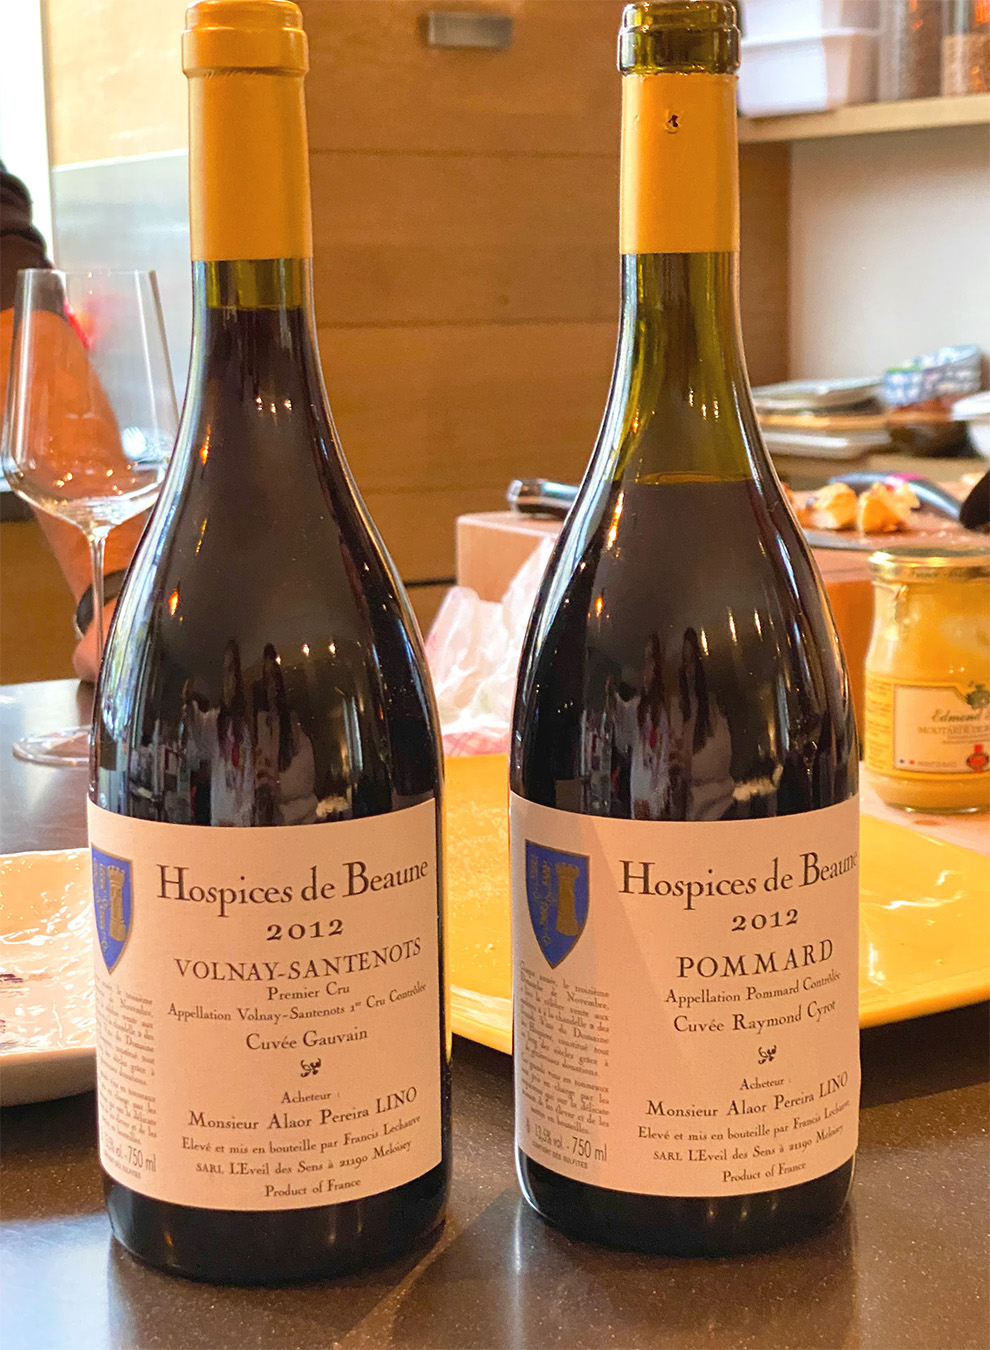 Hospices de Beaune wines purchased by Alaor Pereira Lino 